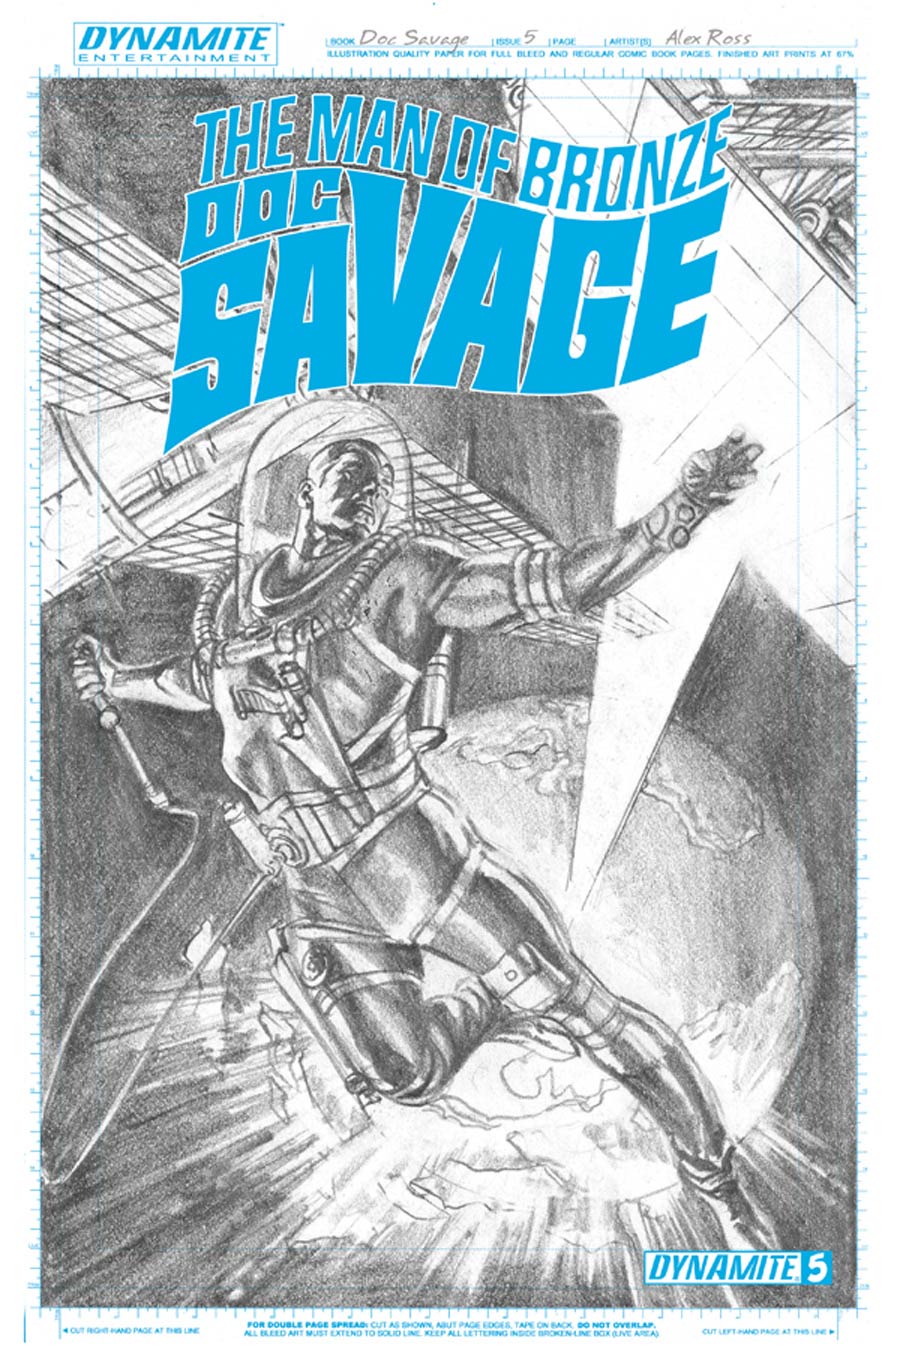 Doc Savage Vol 5 #5 Cover D High-End Alex Ross Art Board Ultra-Limited Variant Cover (ONLY 25 COPIES IN EXISTENCE!)